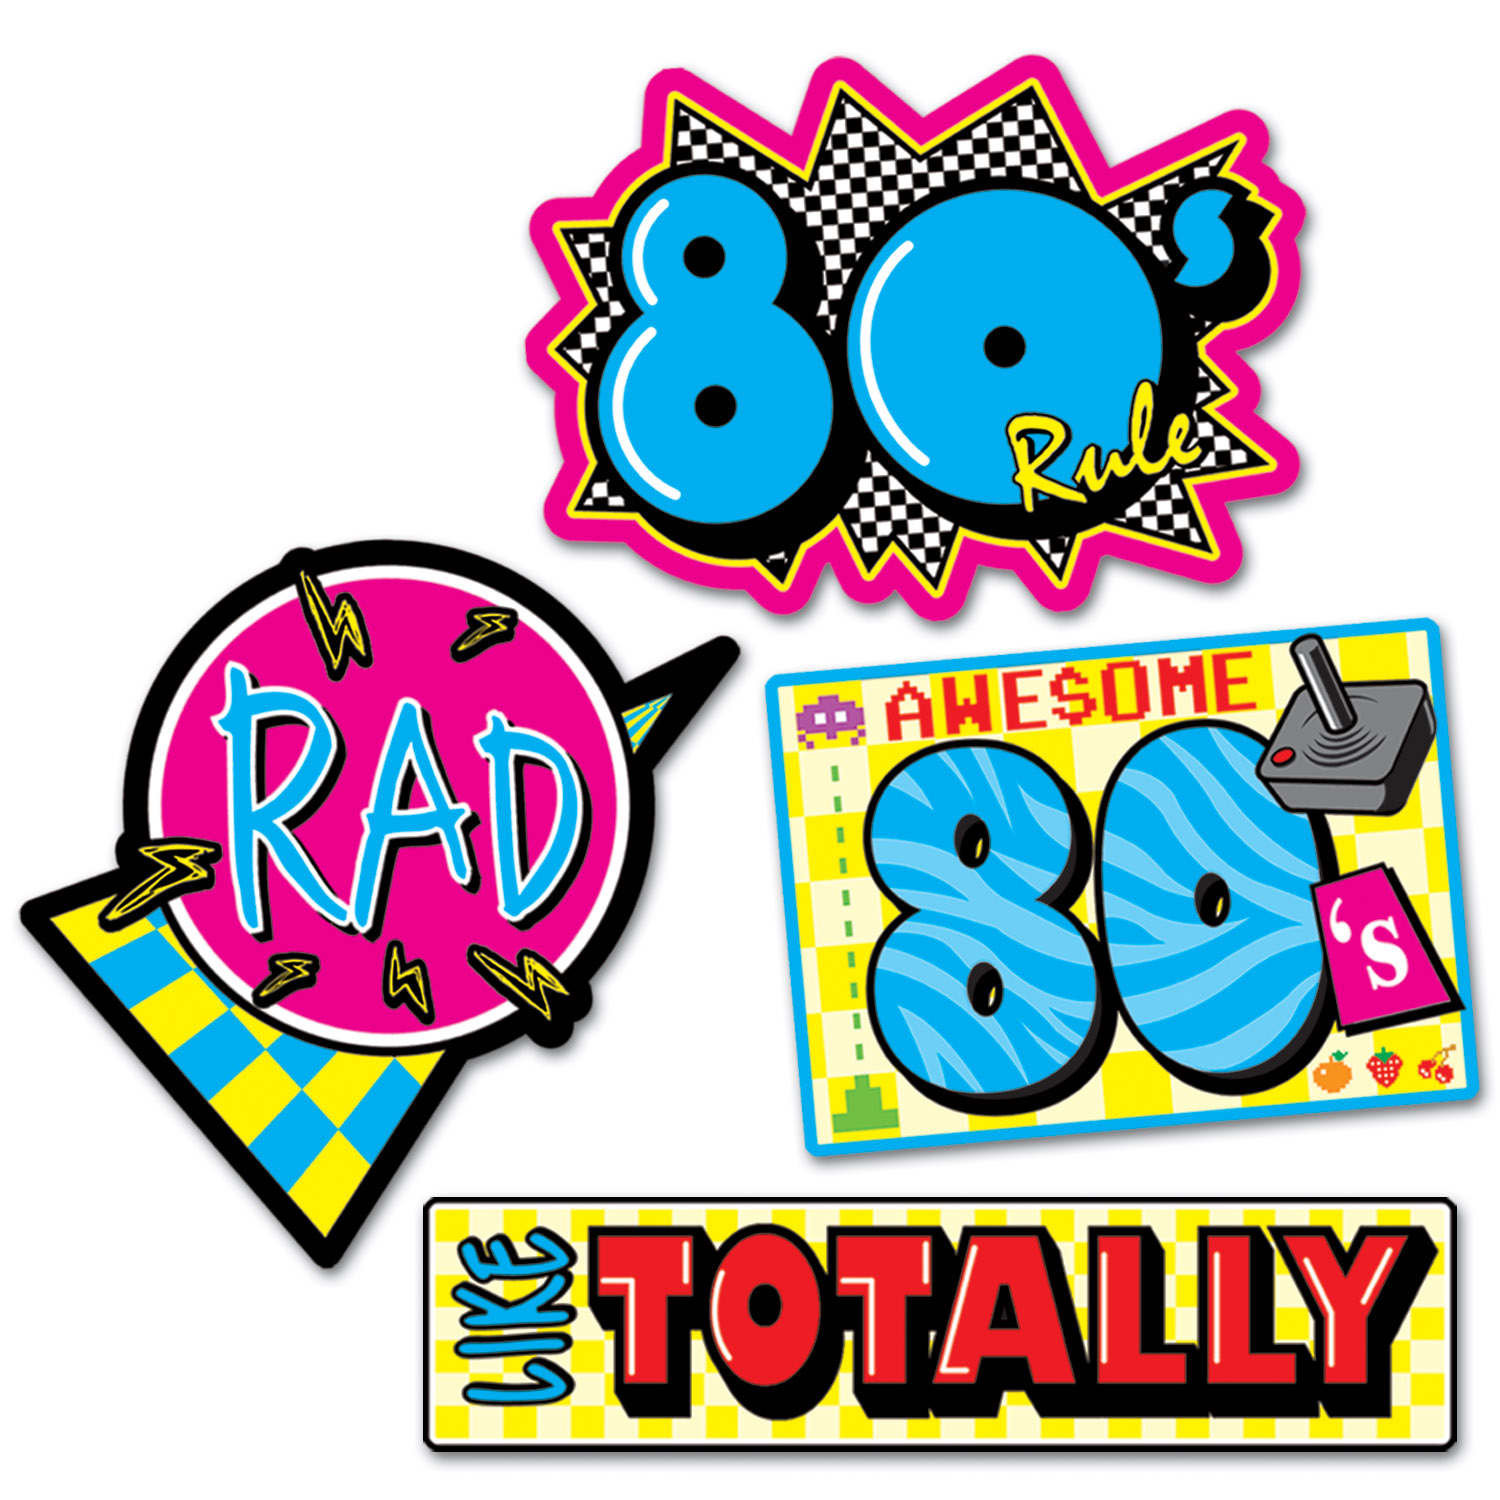 1980s style signs that read, "rad, like totally, awesome 80s, and 80s rule"